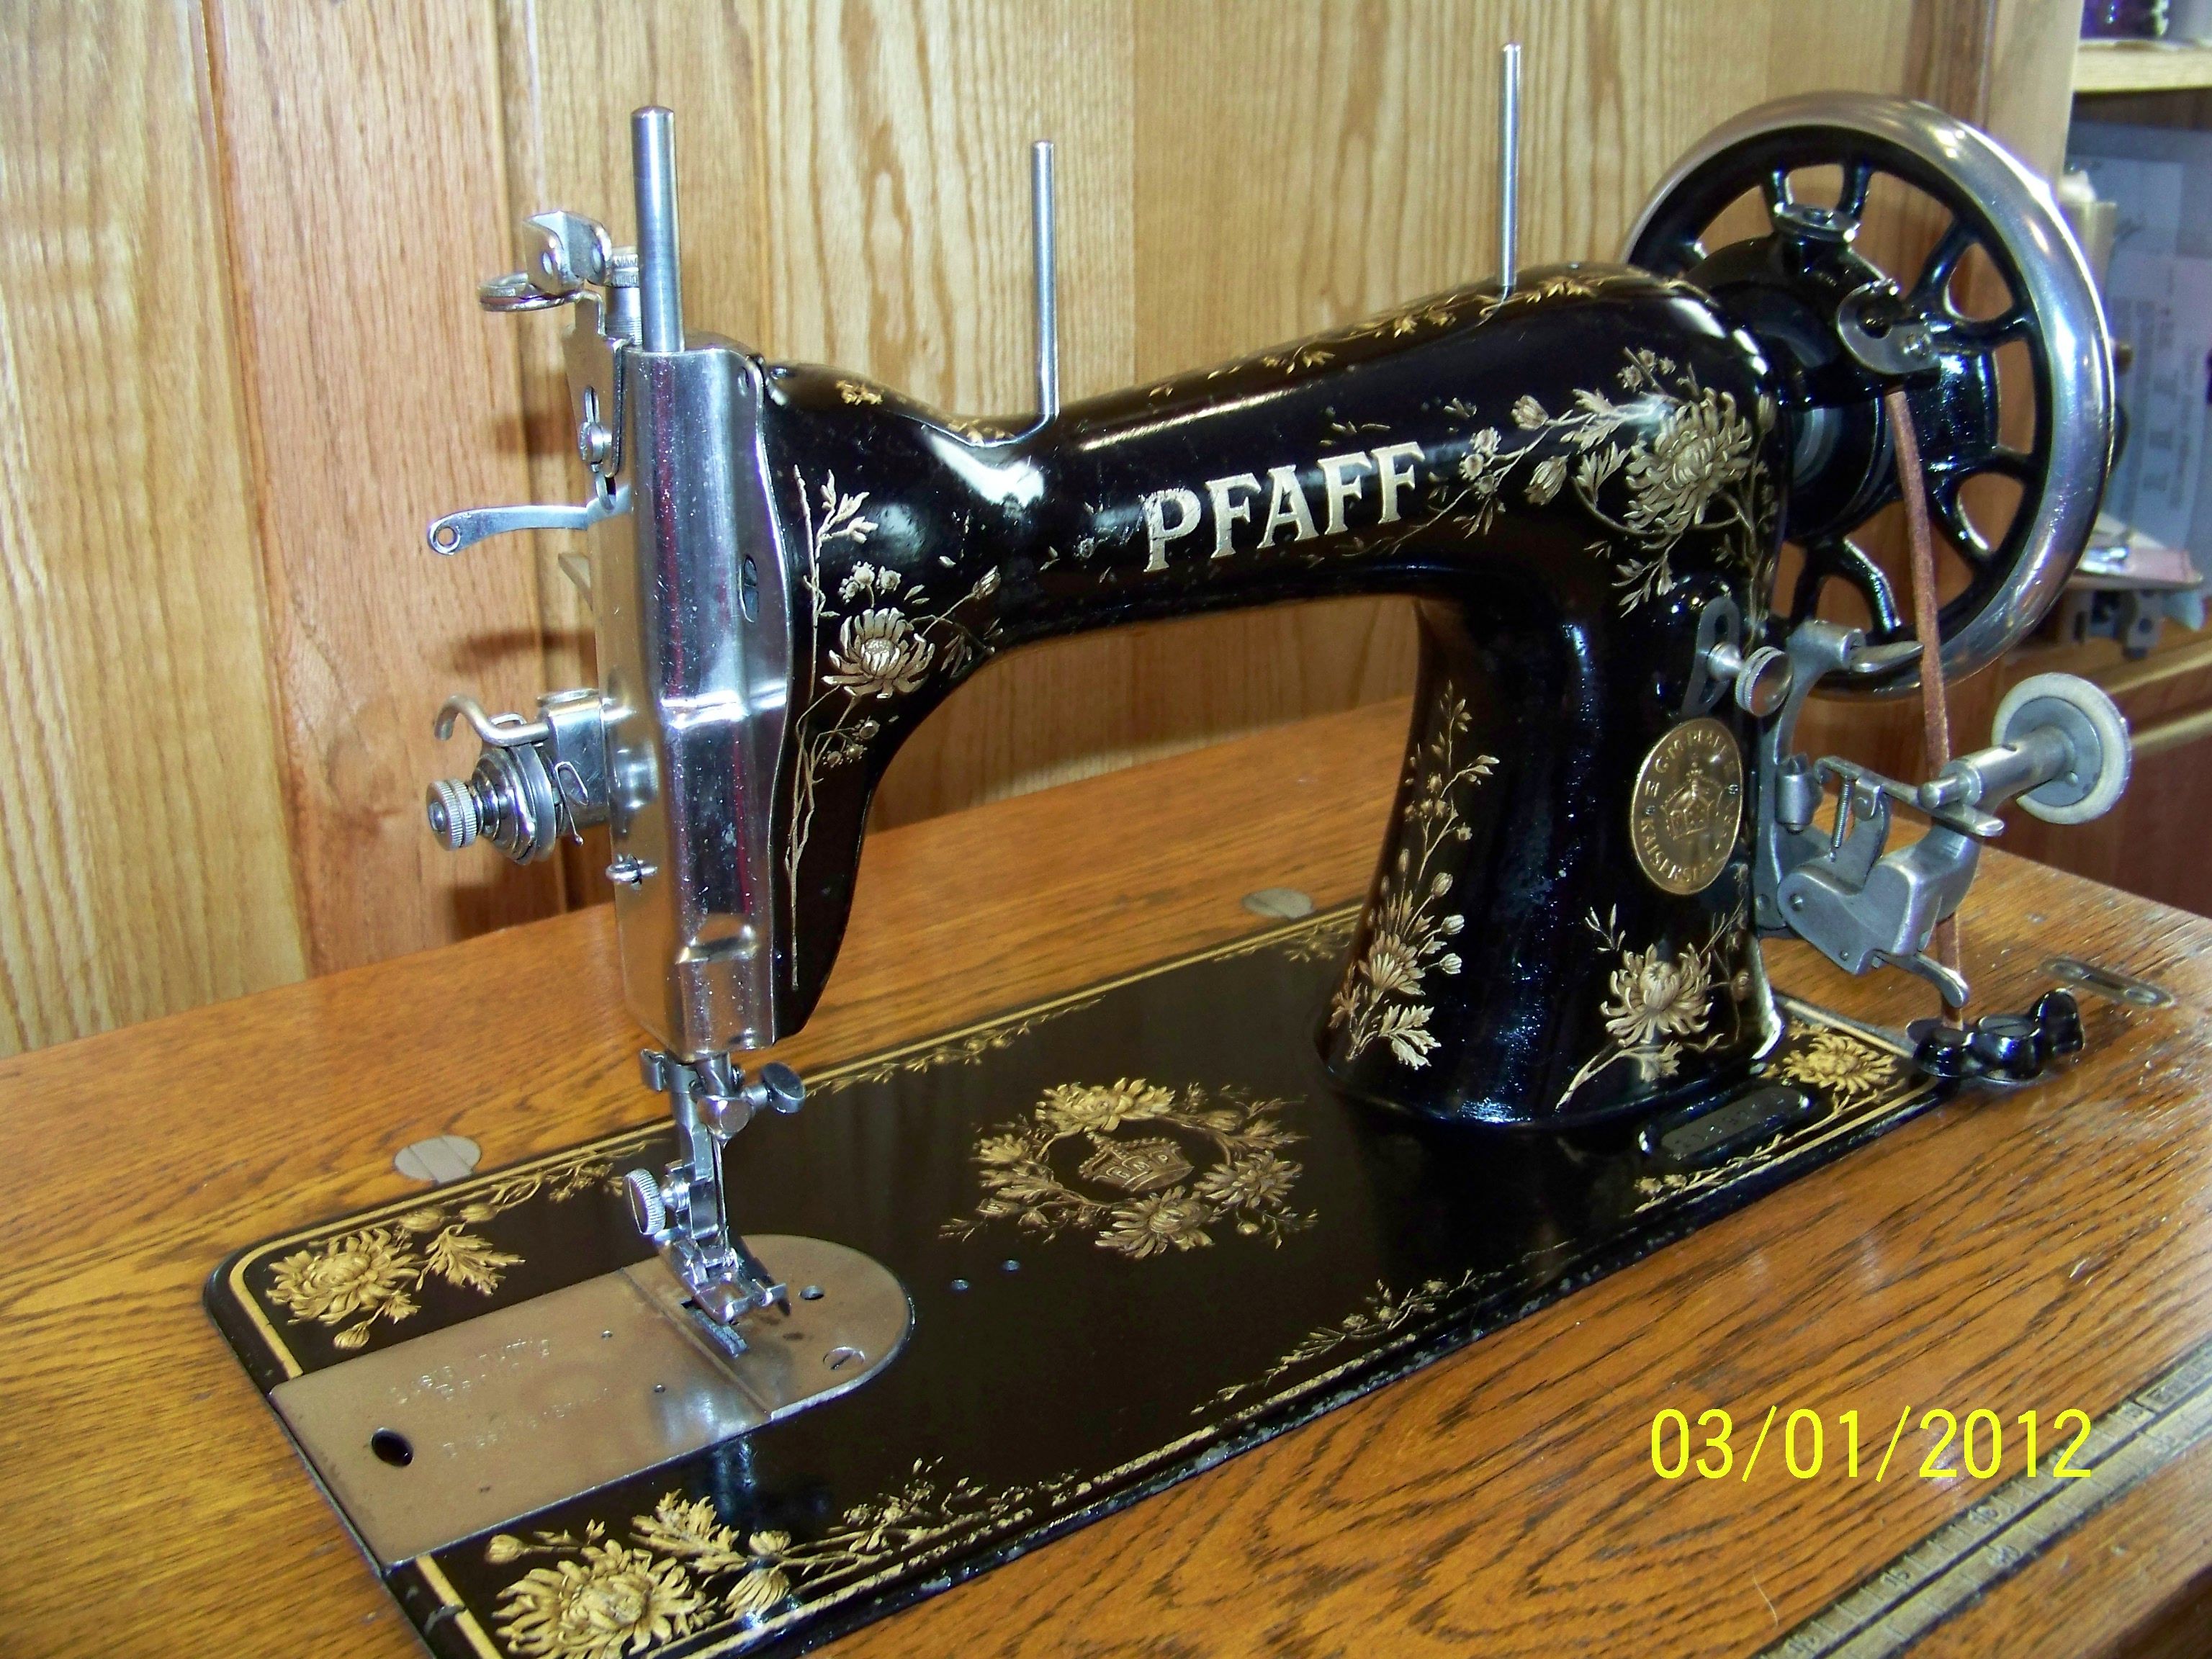 Year Of Manufacture According To Serial Number For Pfaff Sewing Machines